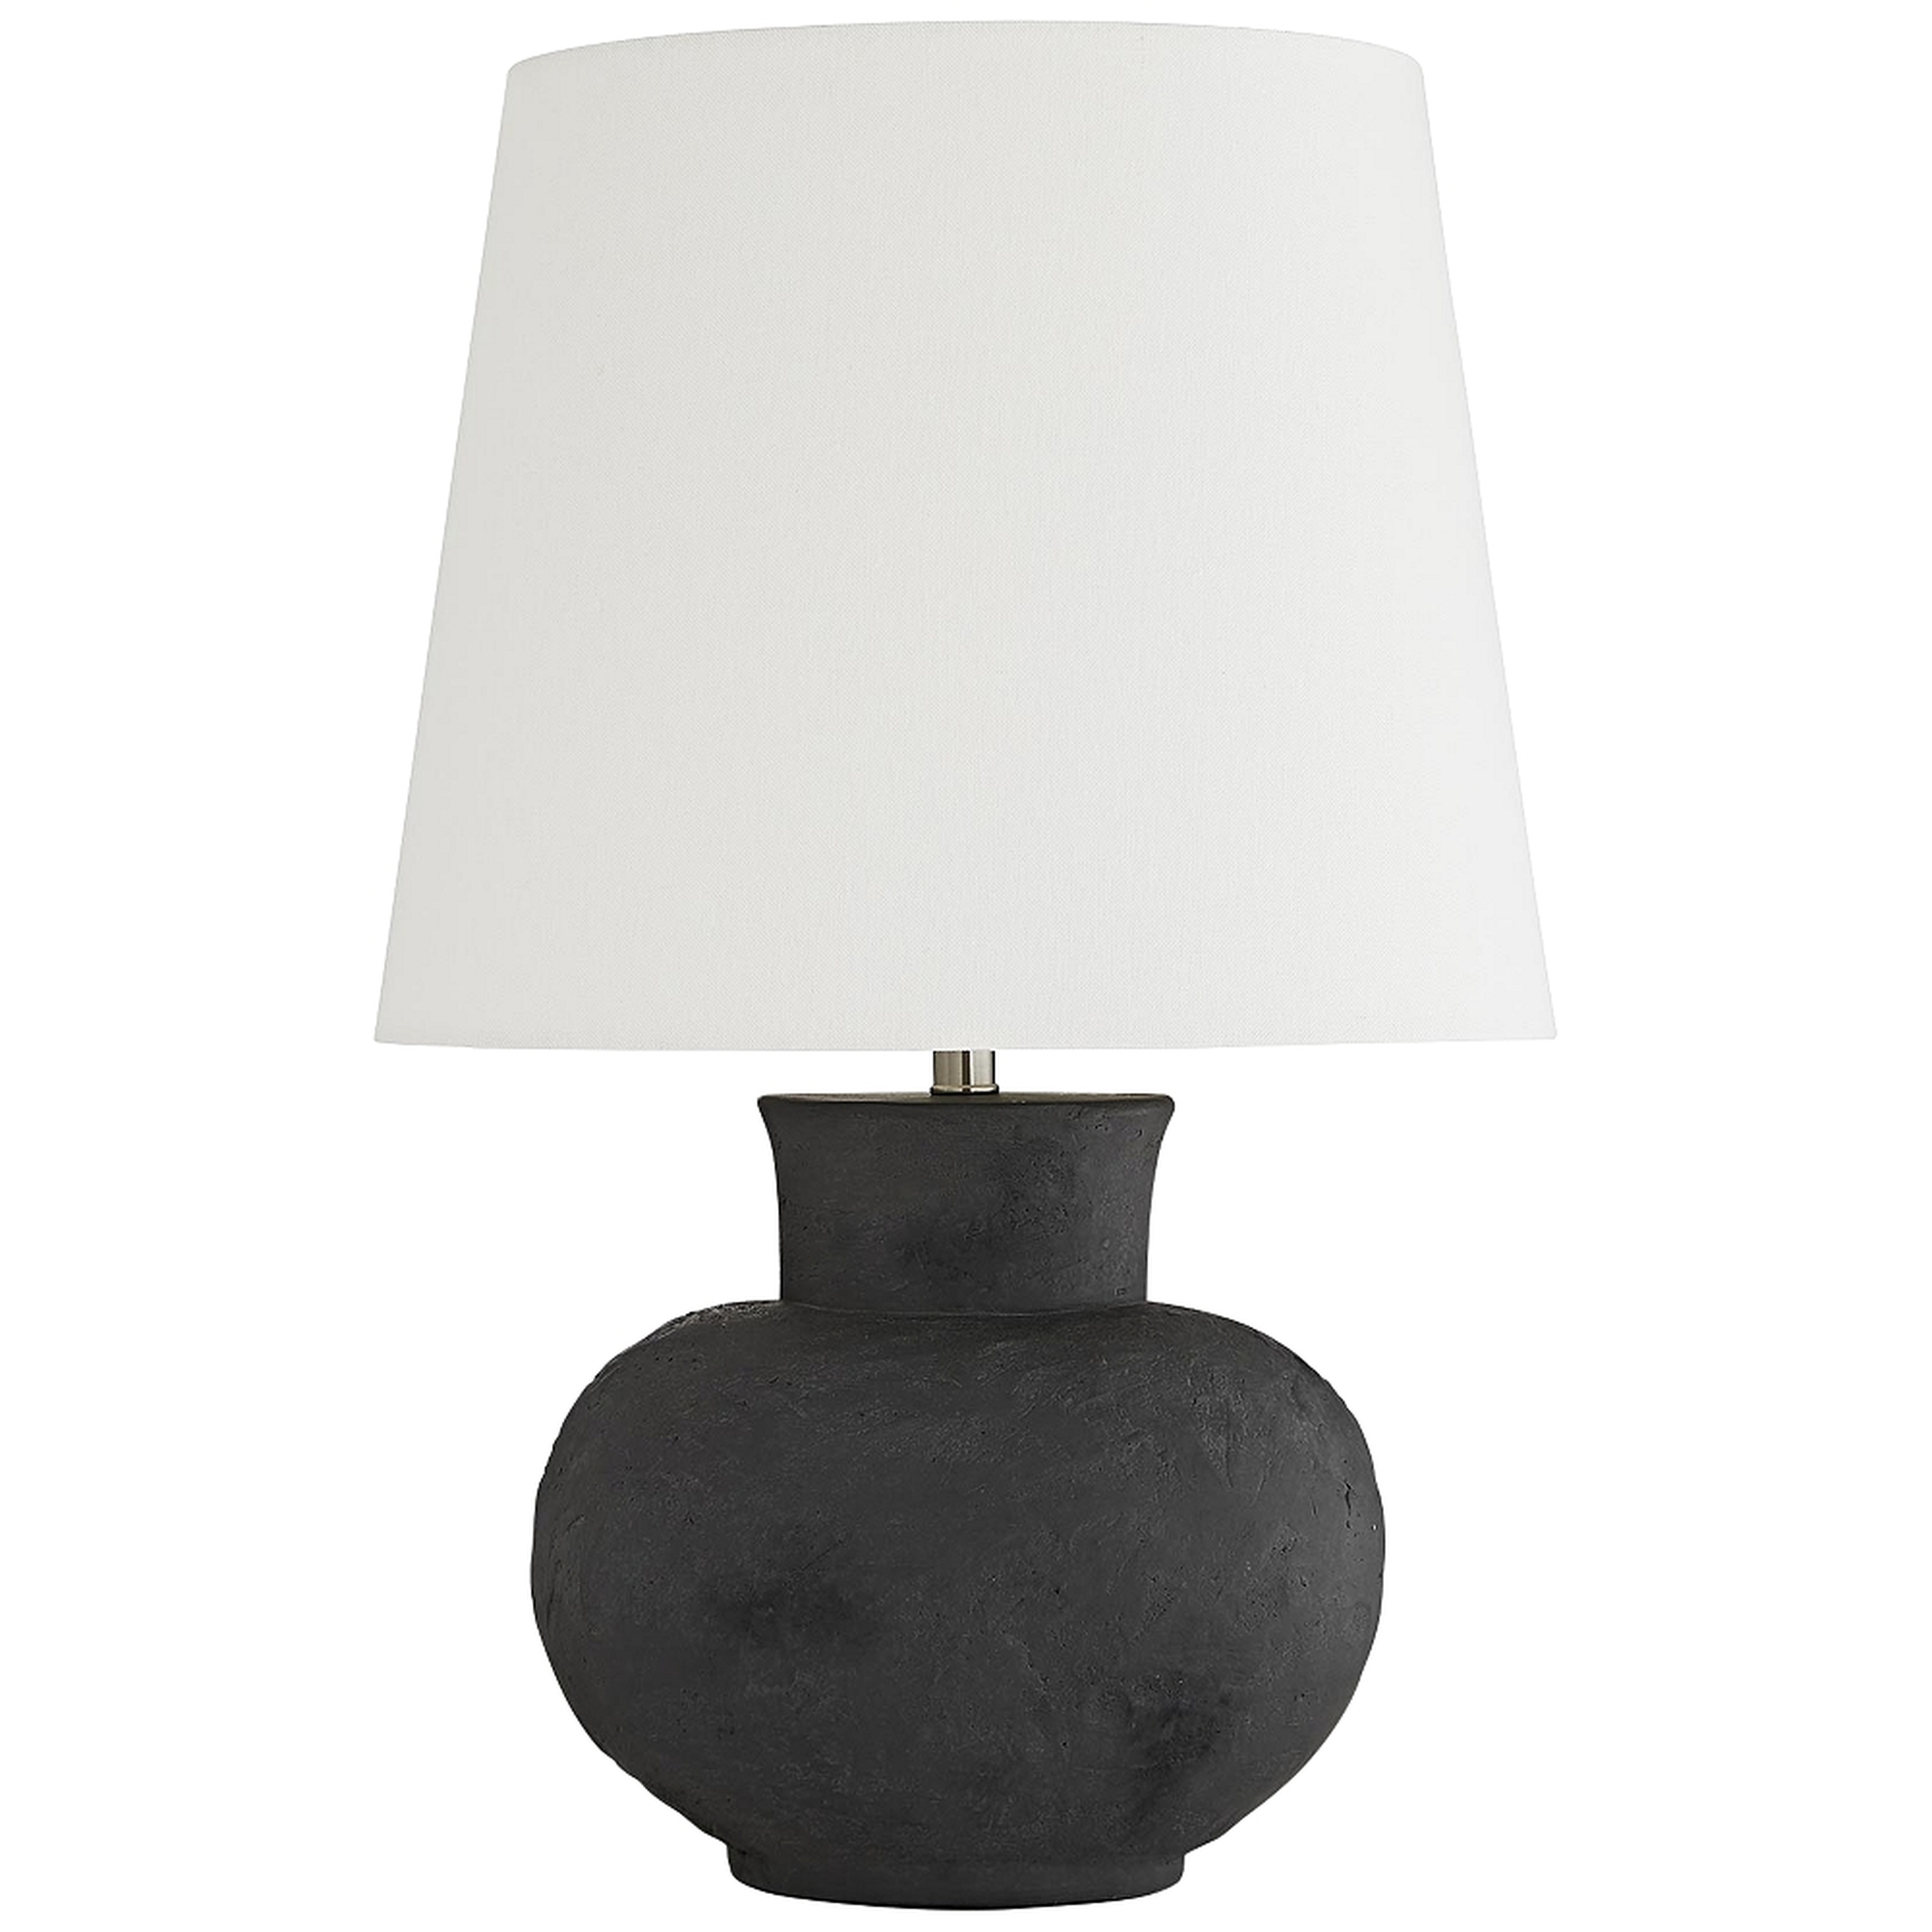 Arteriors Home Troy Matte Charcoal Terracotta Table Lamp - Style # 72R57 - Lamps Plus